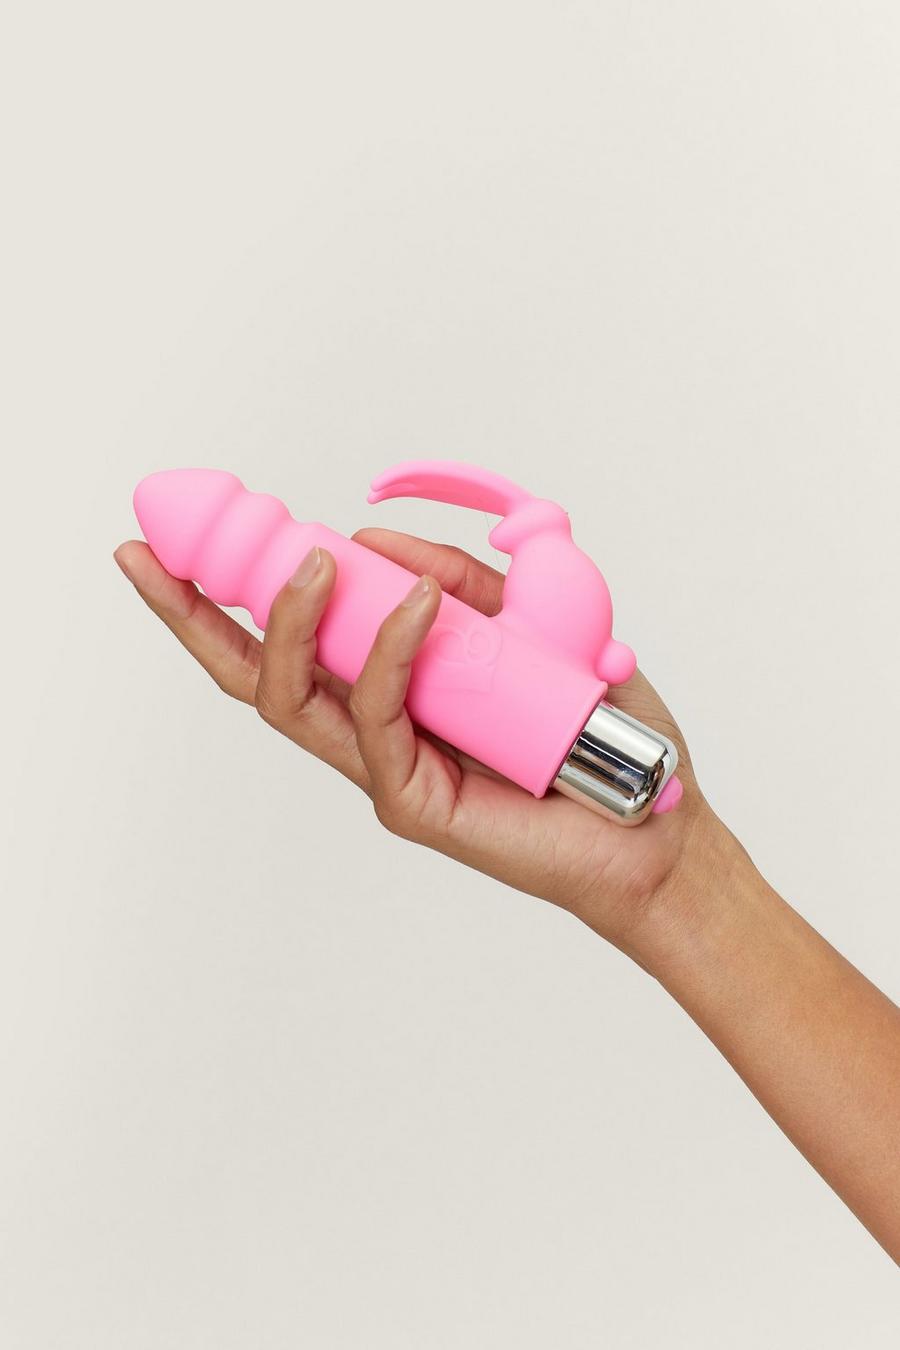 Bunny Side Up 10 Speed Vibrator